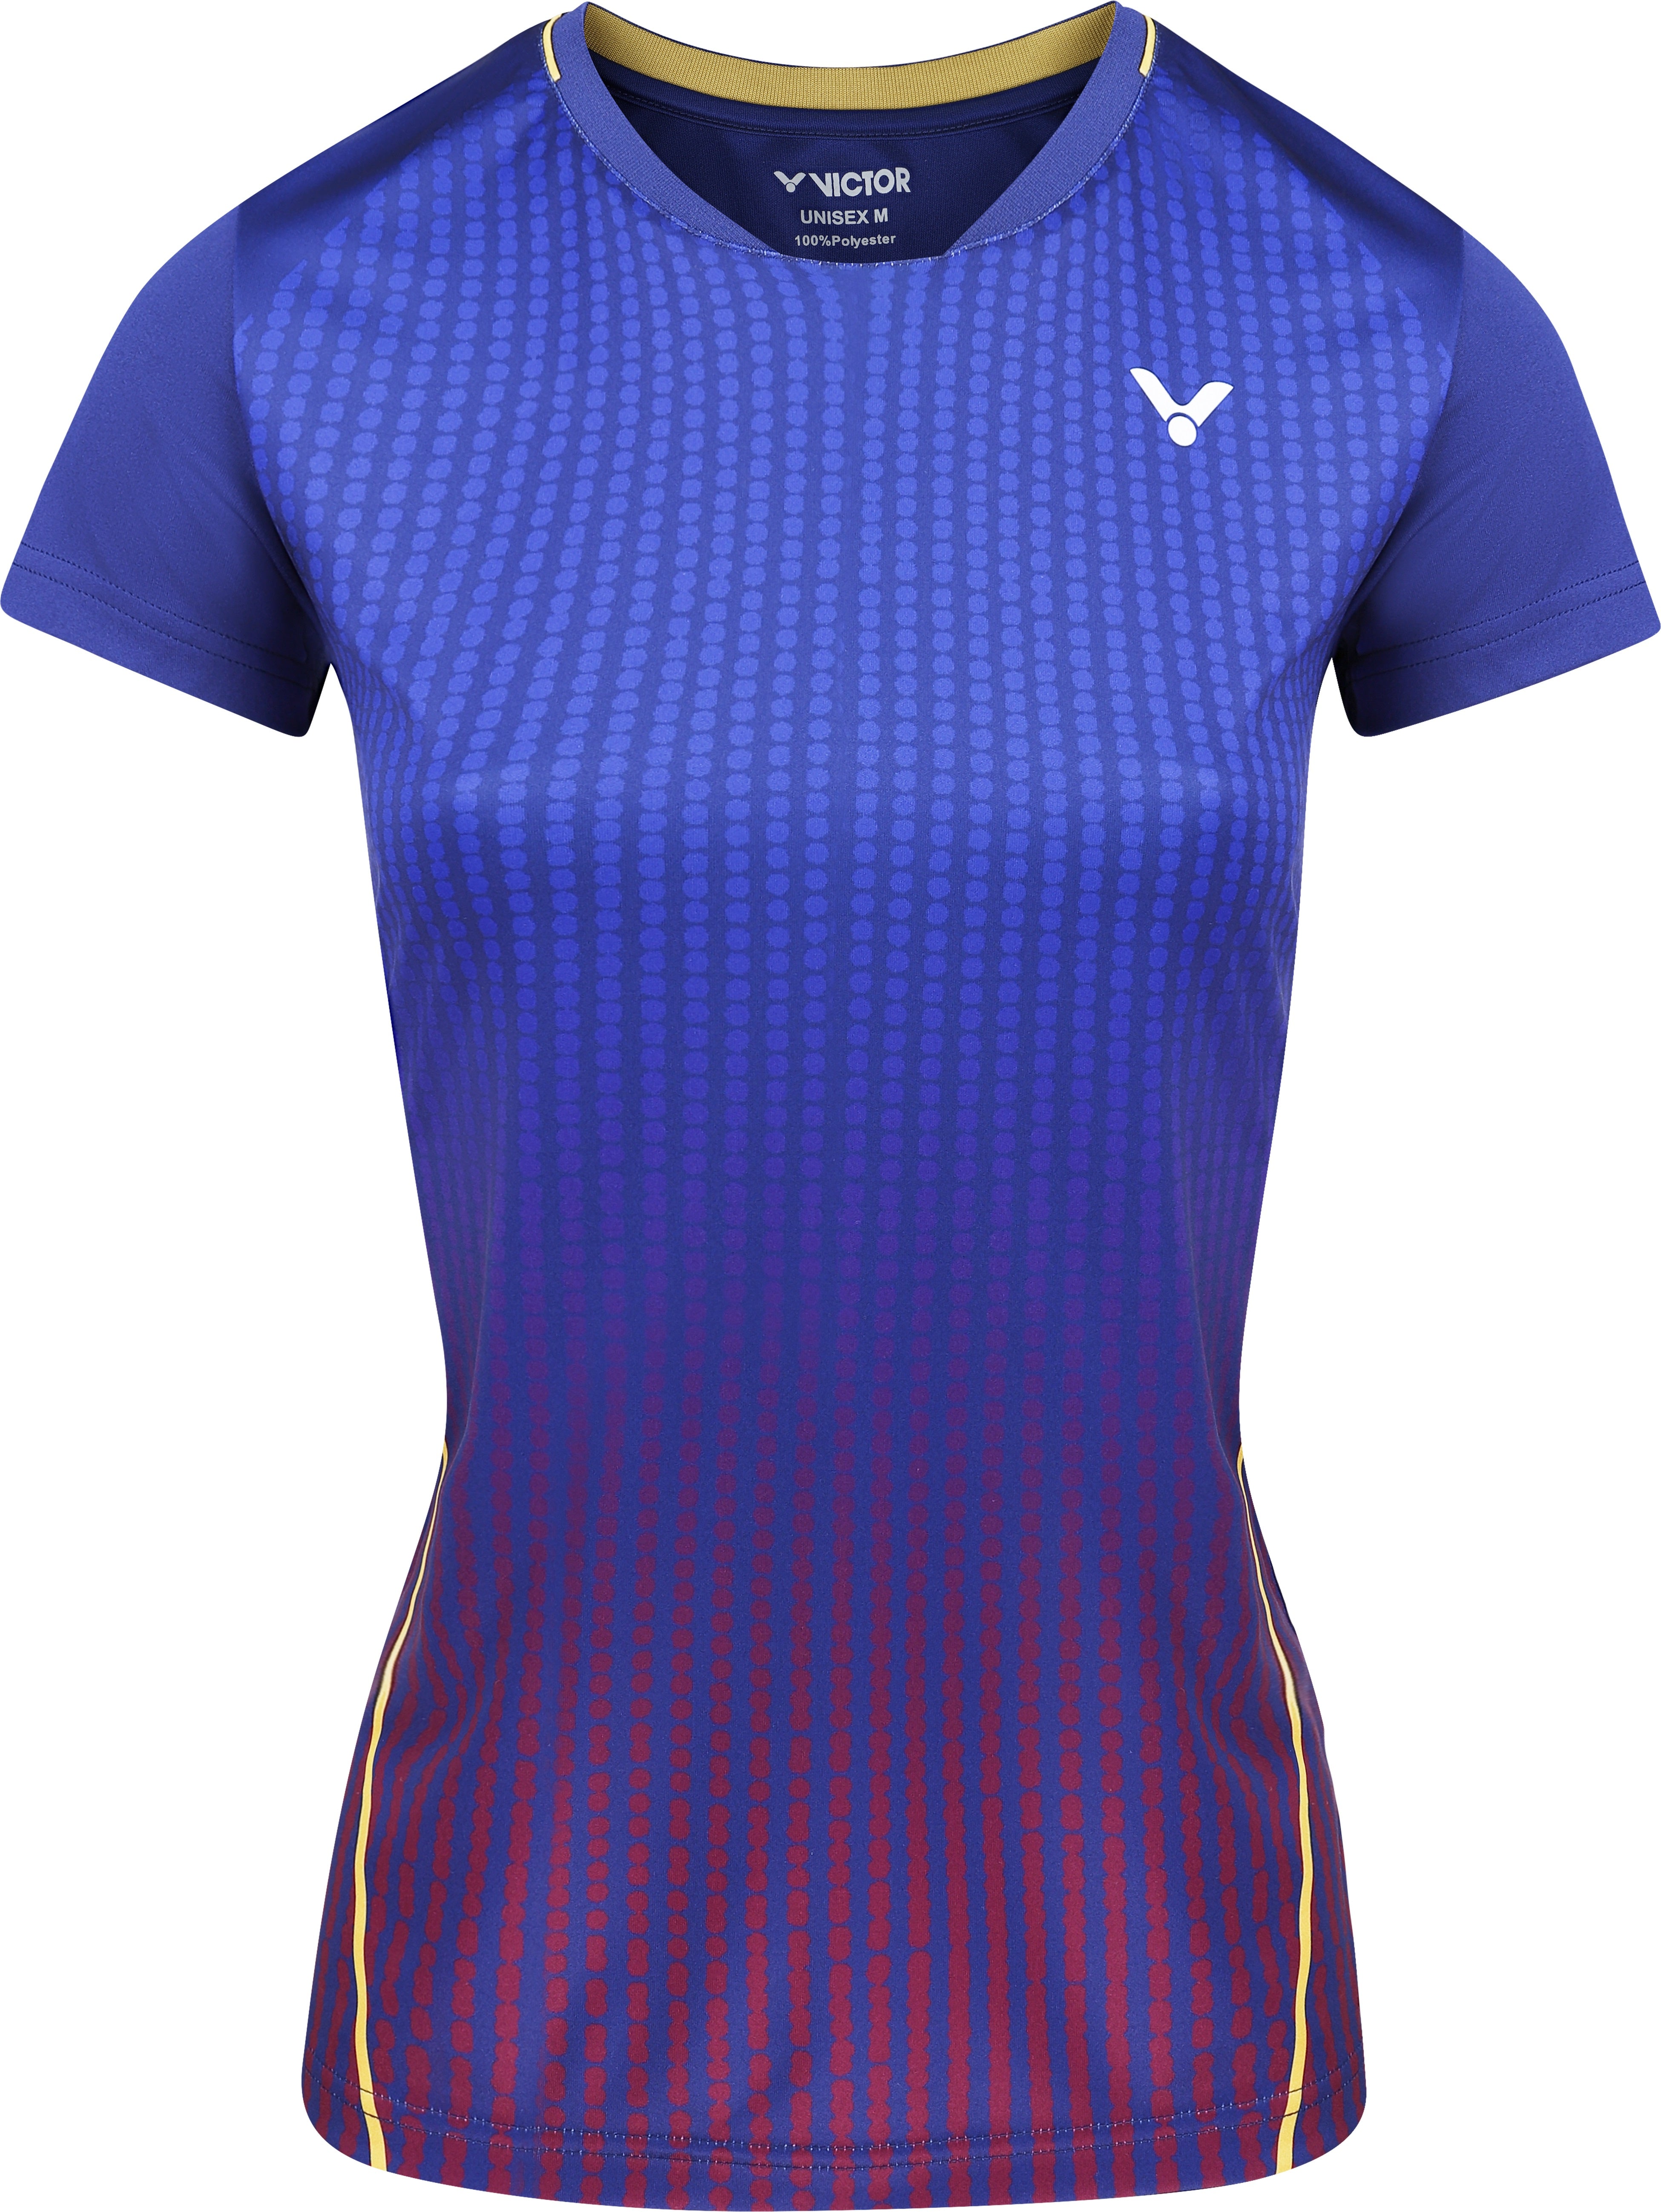 VICTOR 14101 Womens Tee Auckland